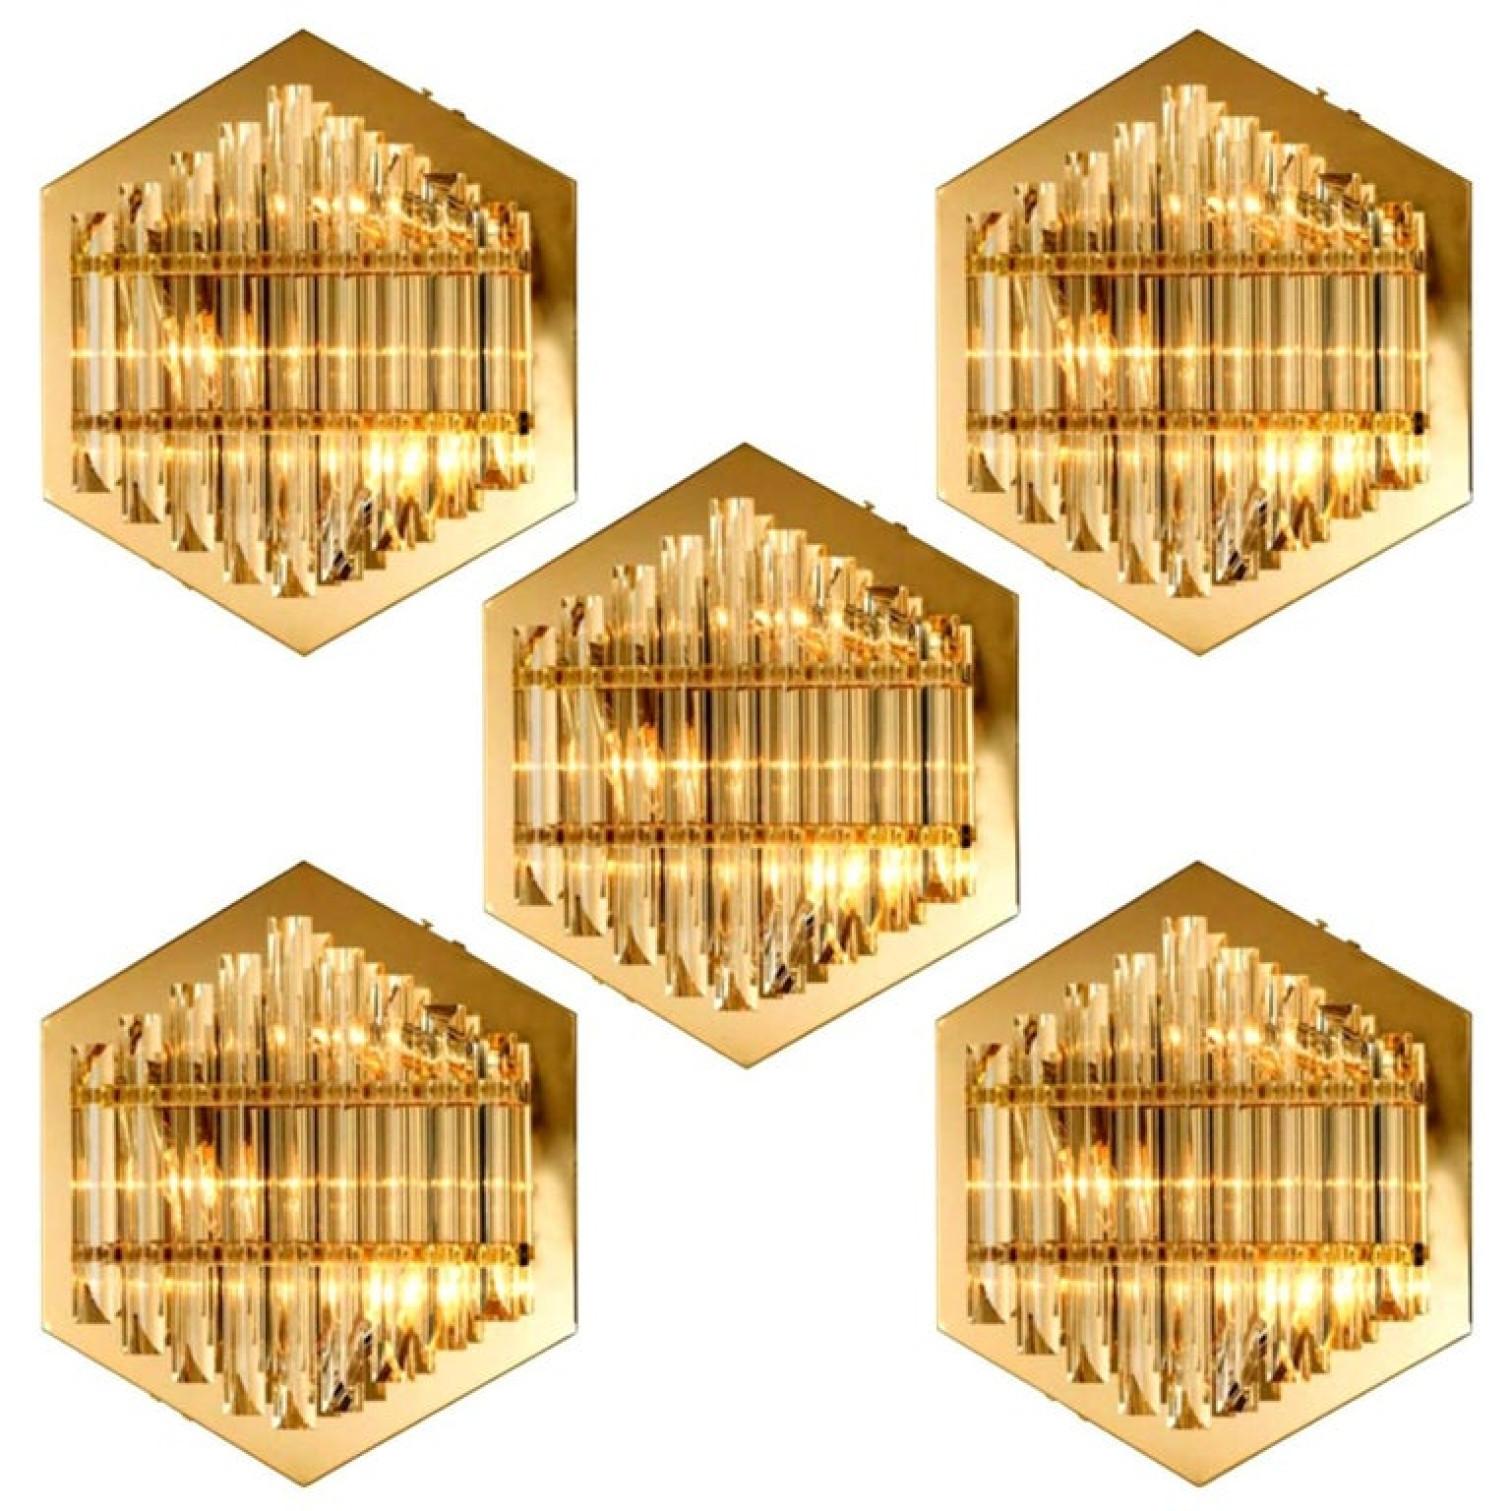 One of the six Venini style glass sconces with triedi crystals, manufactured in circa 1970 (late 1960s and early 1970s) featuring 9 crystal clear glass 